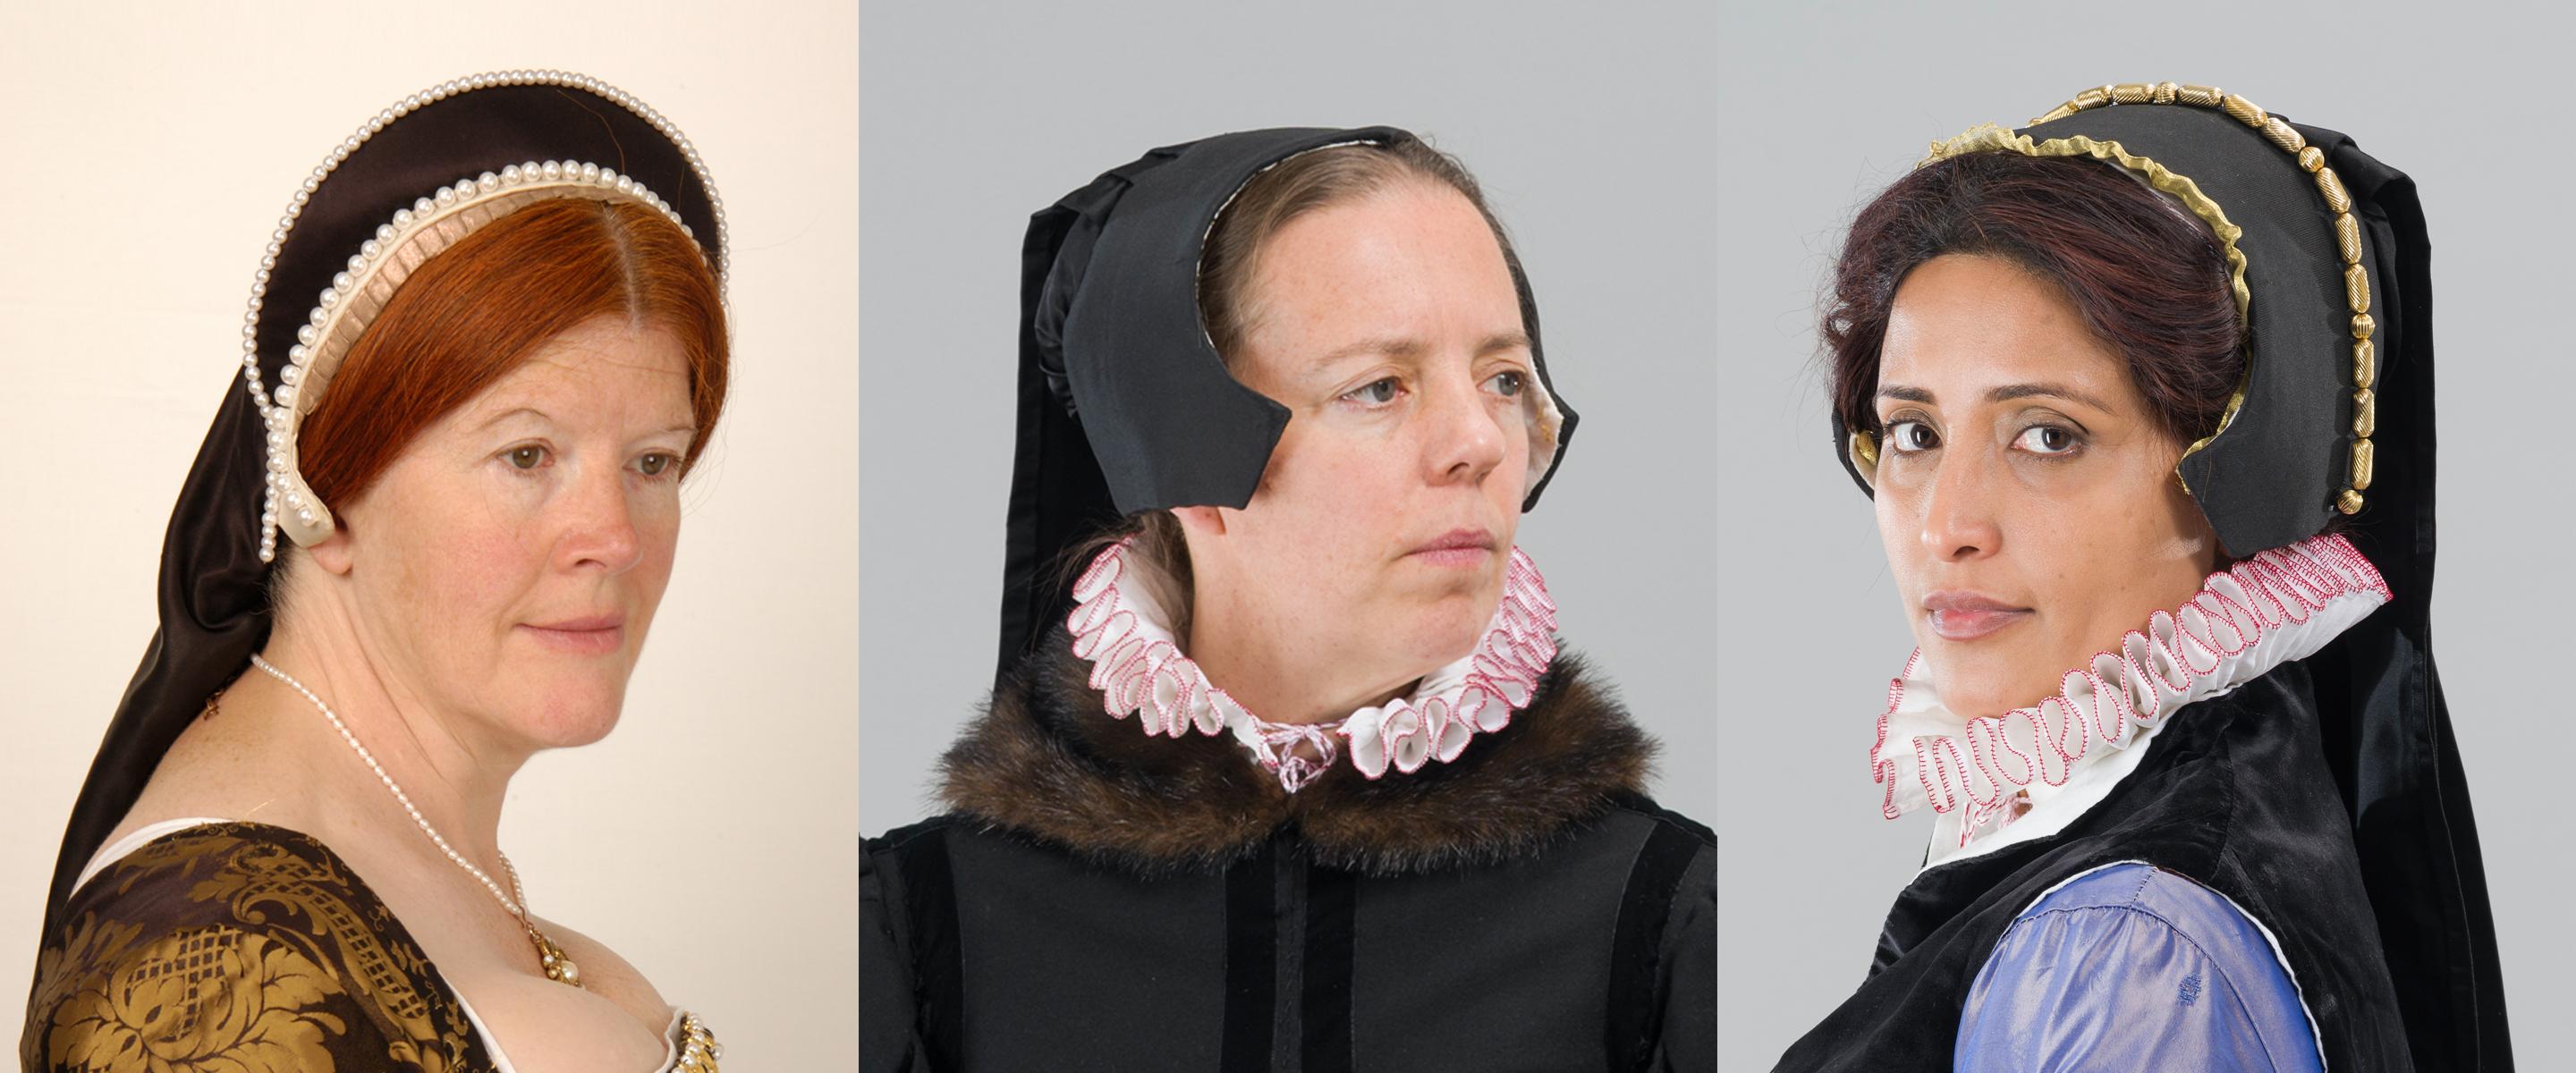 French hoods came in a wide variety of styles - composed of many separate elements pinned together (The Tudor Tailor, 2006: 28)